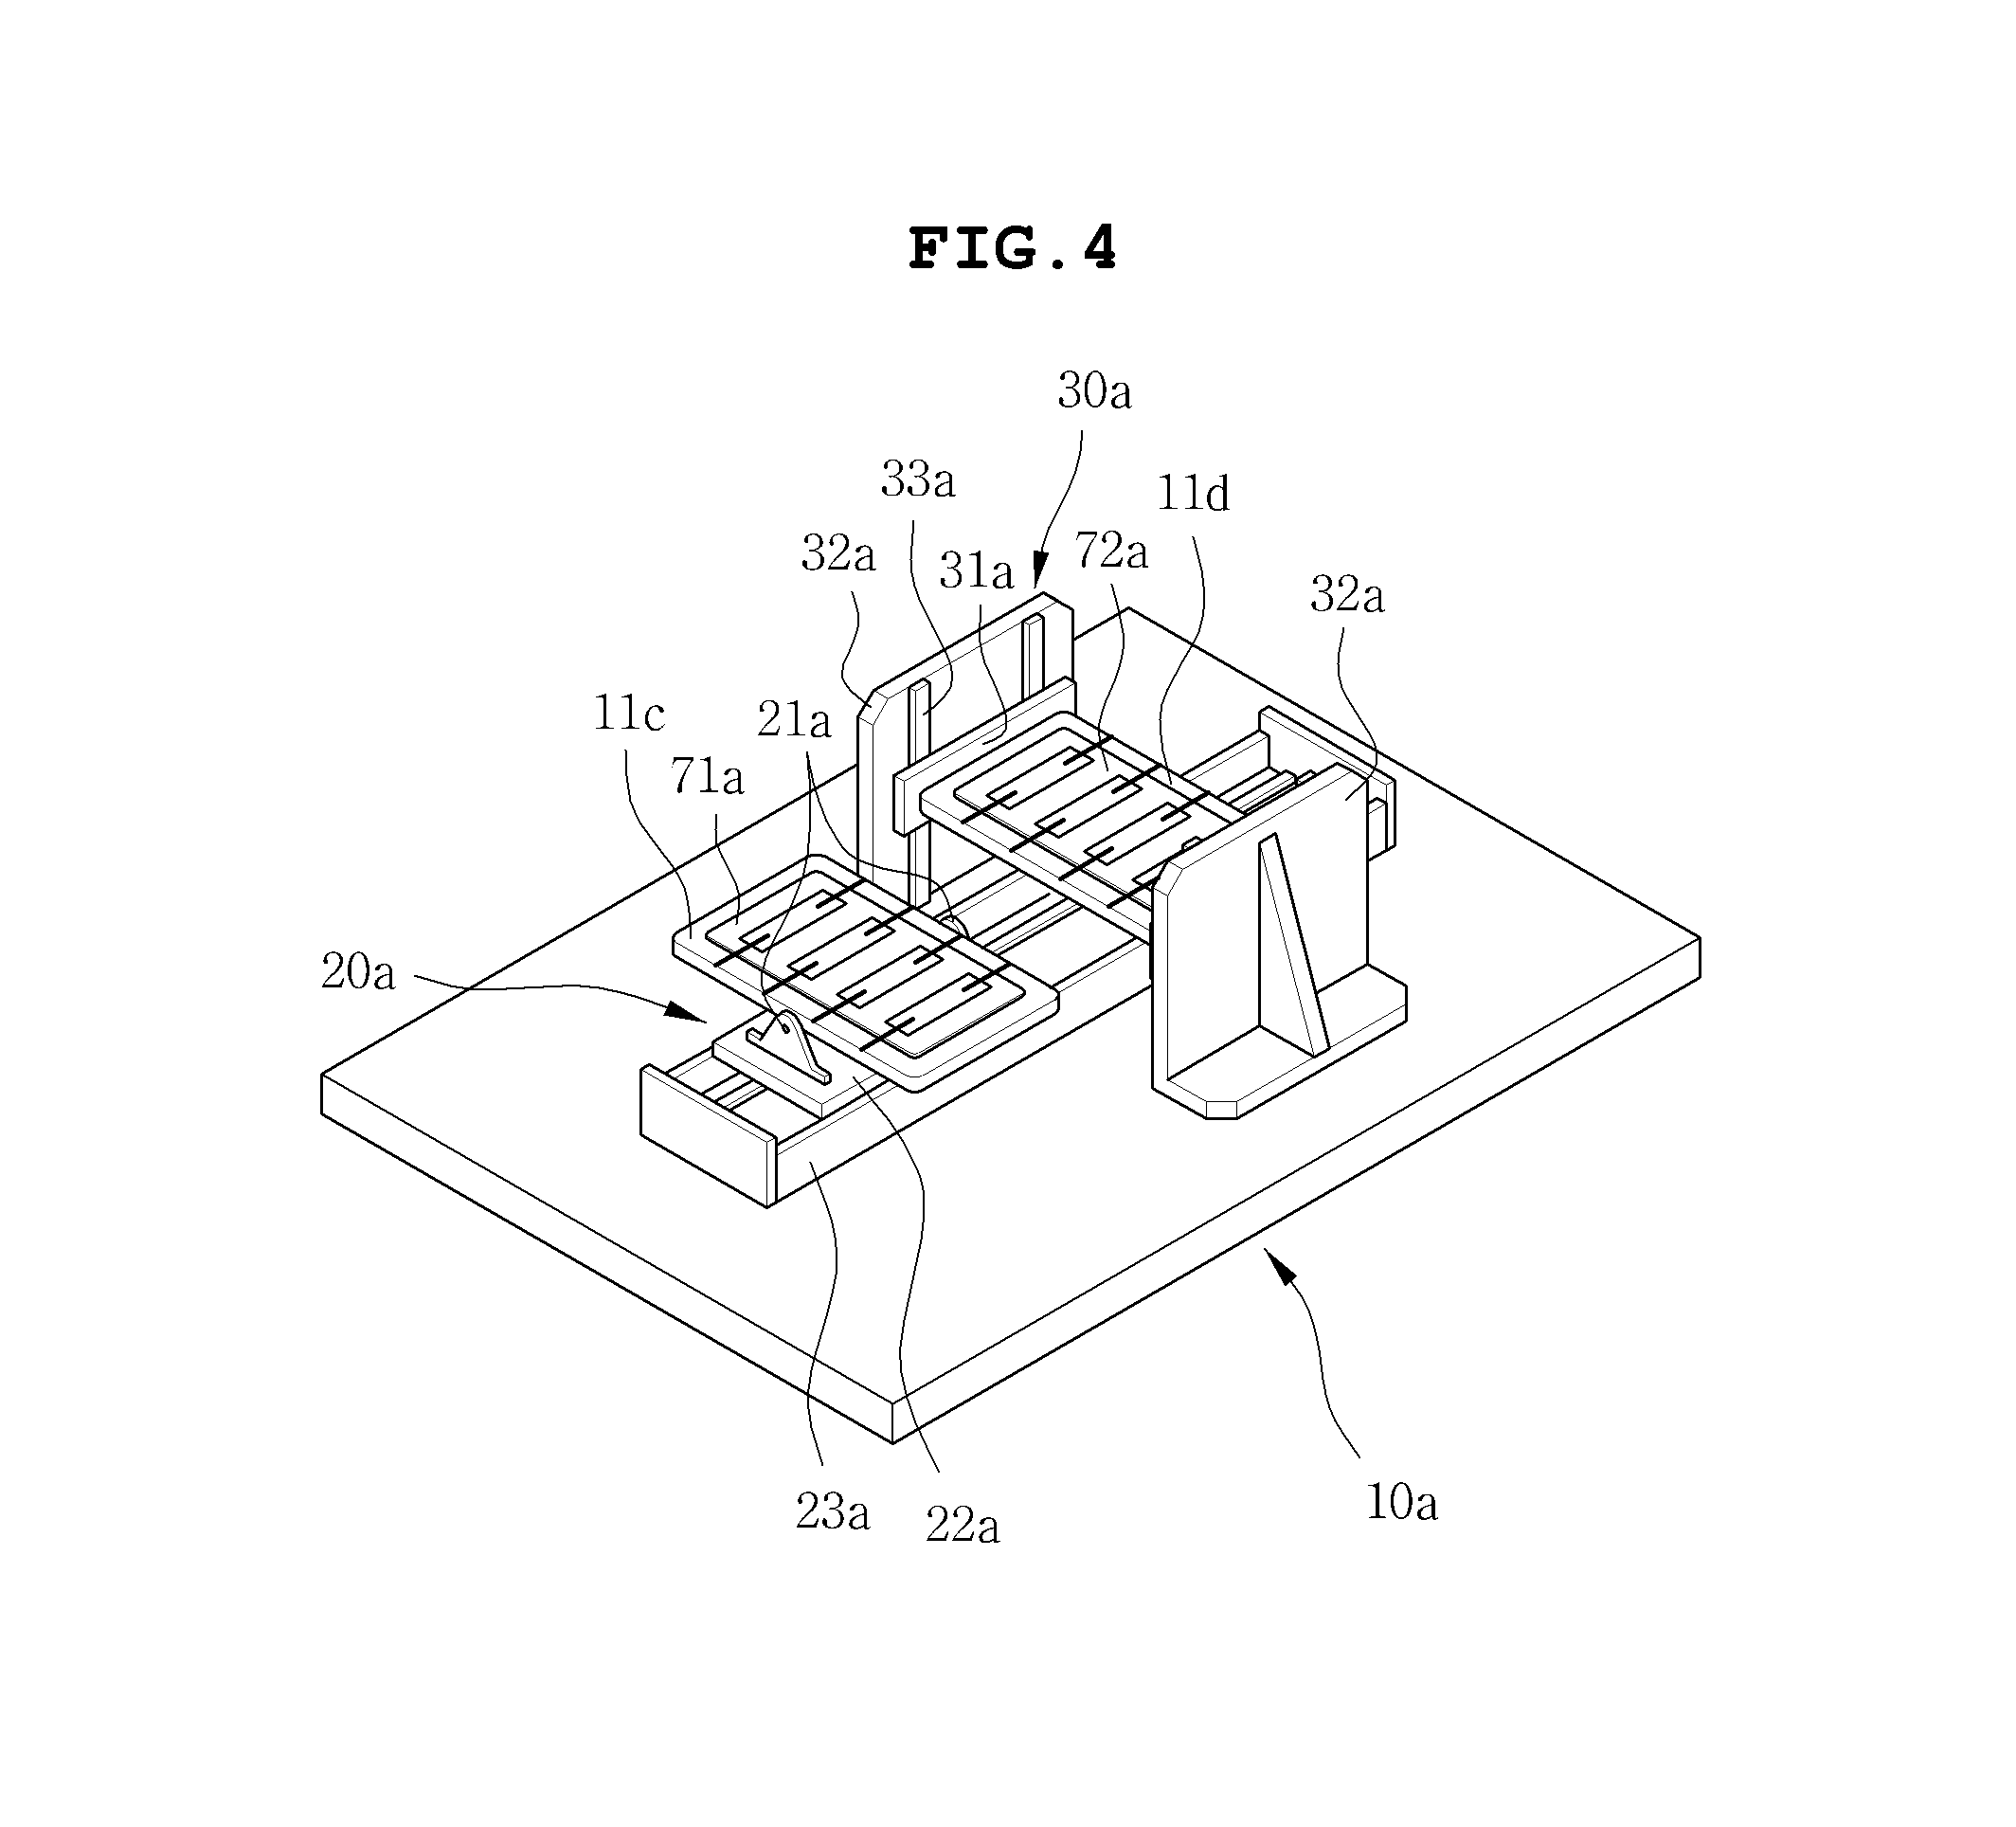 Stamping apparatus for biochips and method for operation thereof